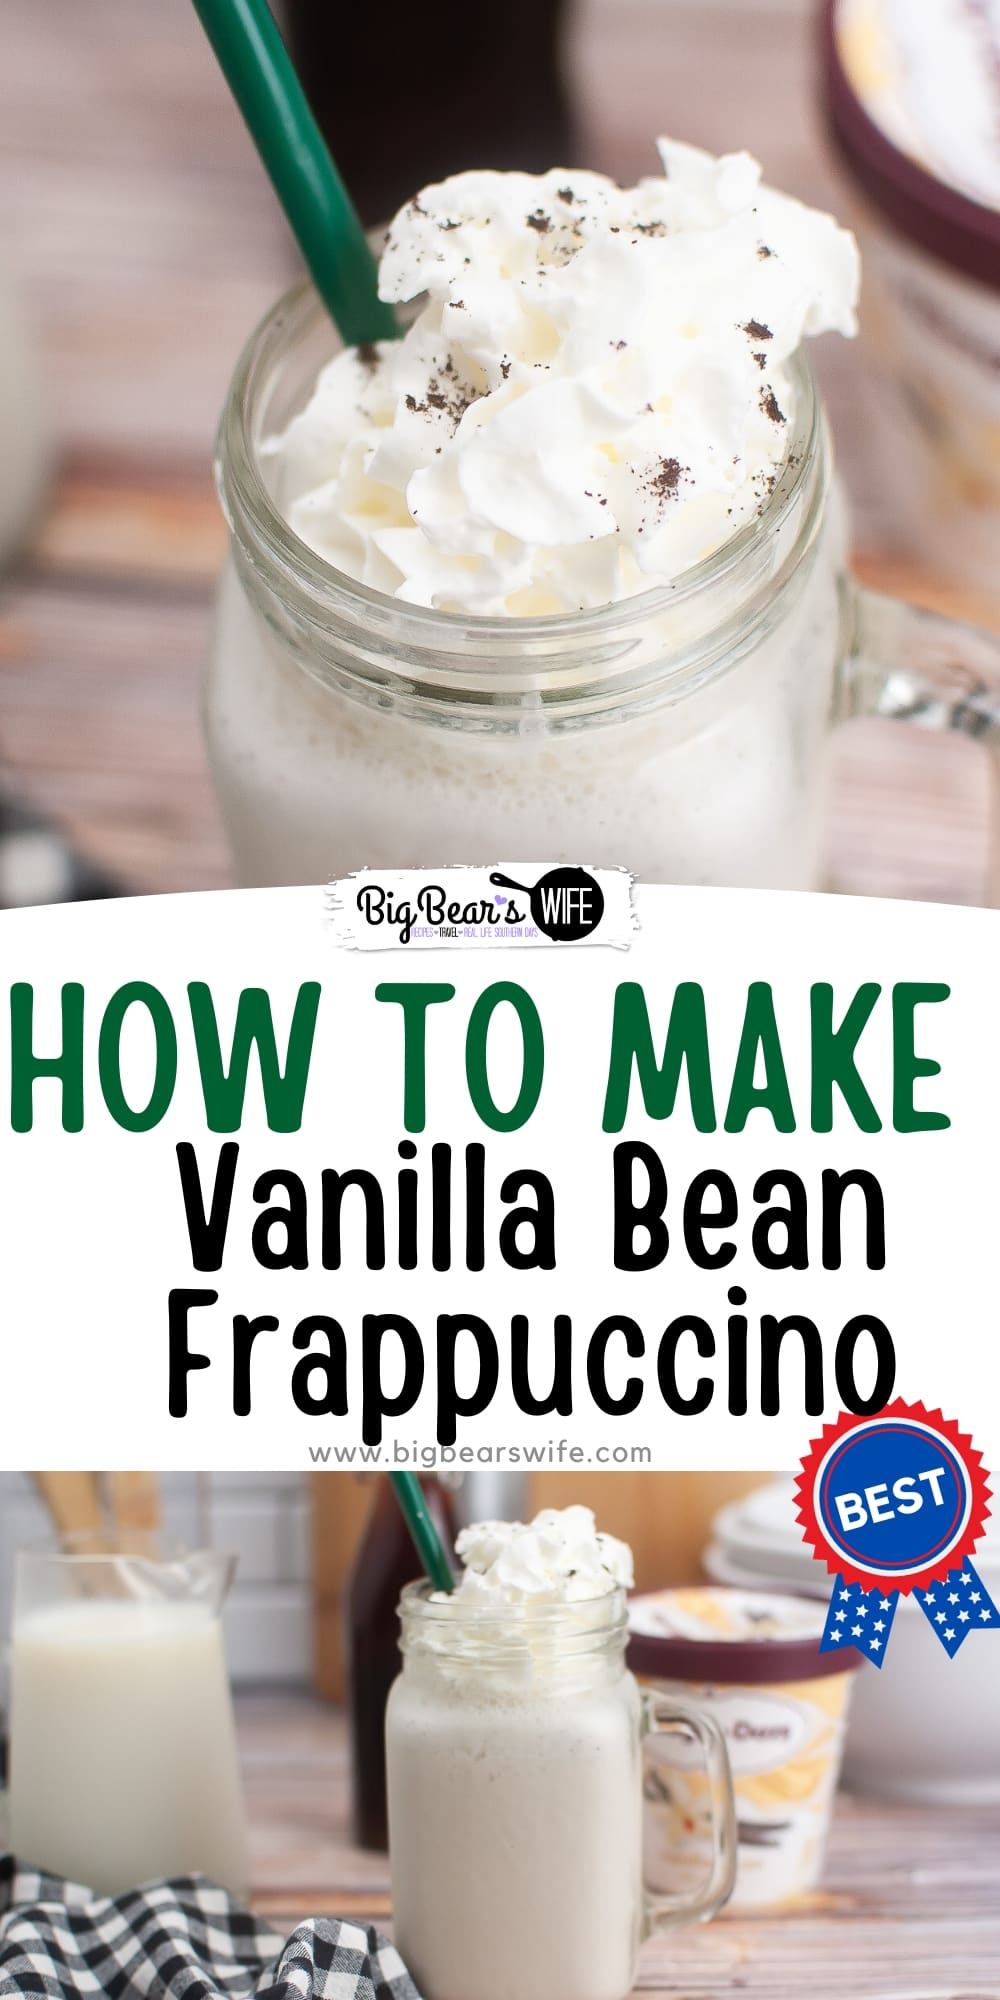 Tired of waiting in long lines at the coffee shop? With this homemade vanilla bean frappuccino recipe, you can skip the hassle and make your favorite icy beverage right in your own kitchen. This homemade Frappuccino is sure to satisfy your craving. via @bigbearswife